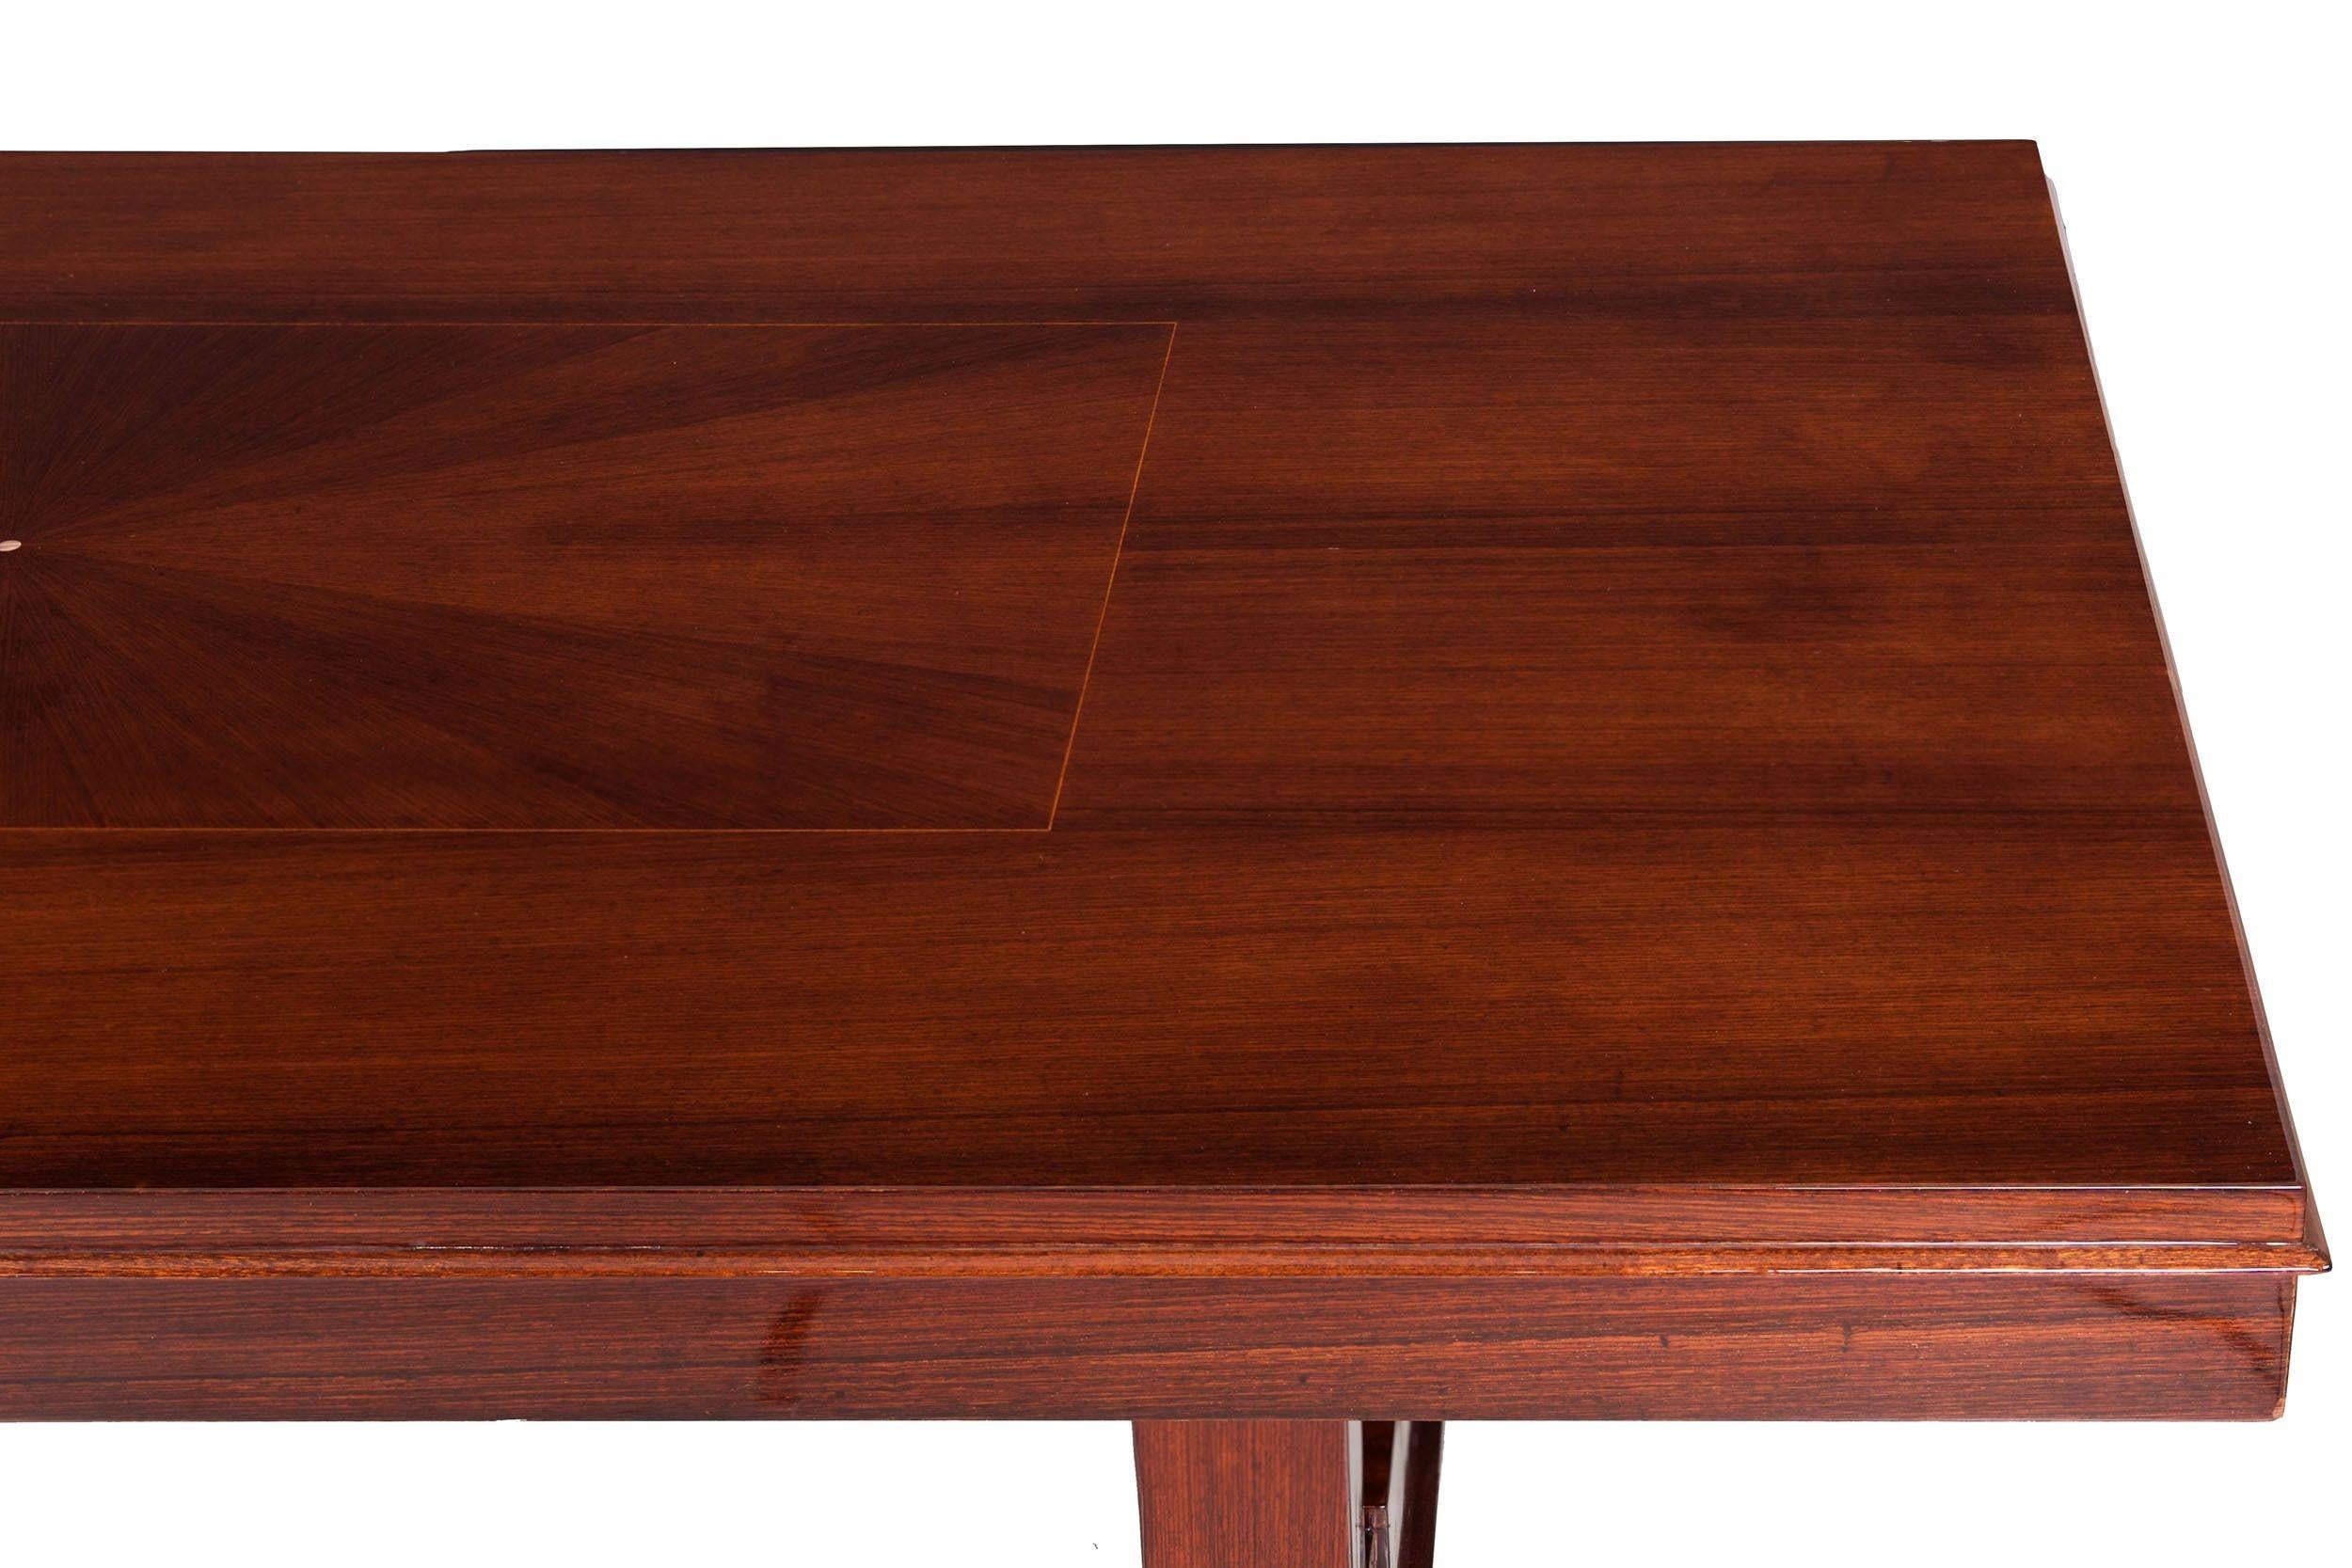 French Art Deco Inlaid Mother-of-Pearl Rosewood Dining Table, circa 1940s For Sale 15